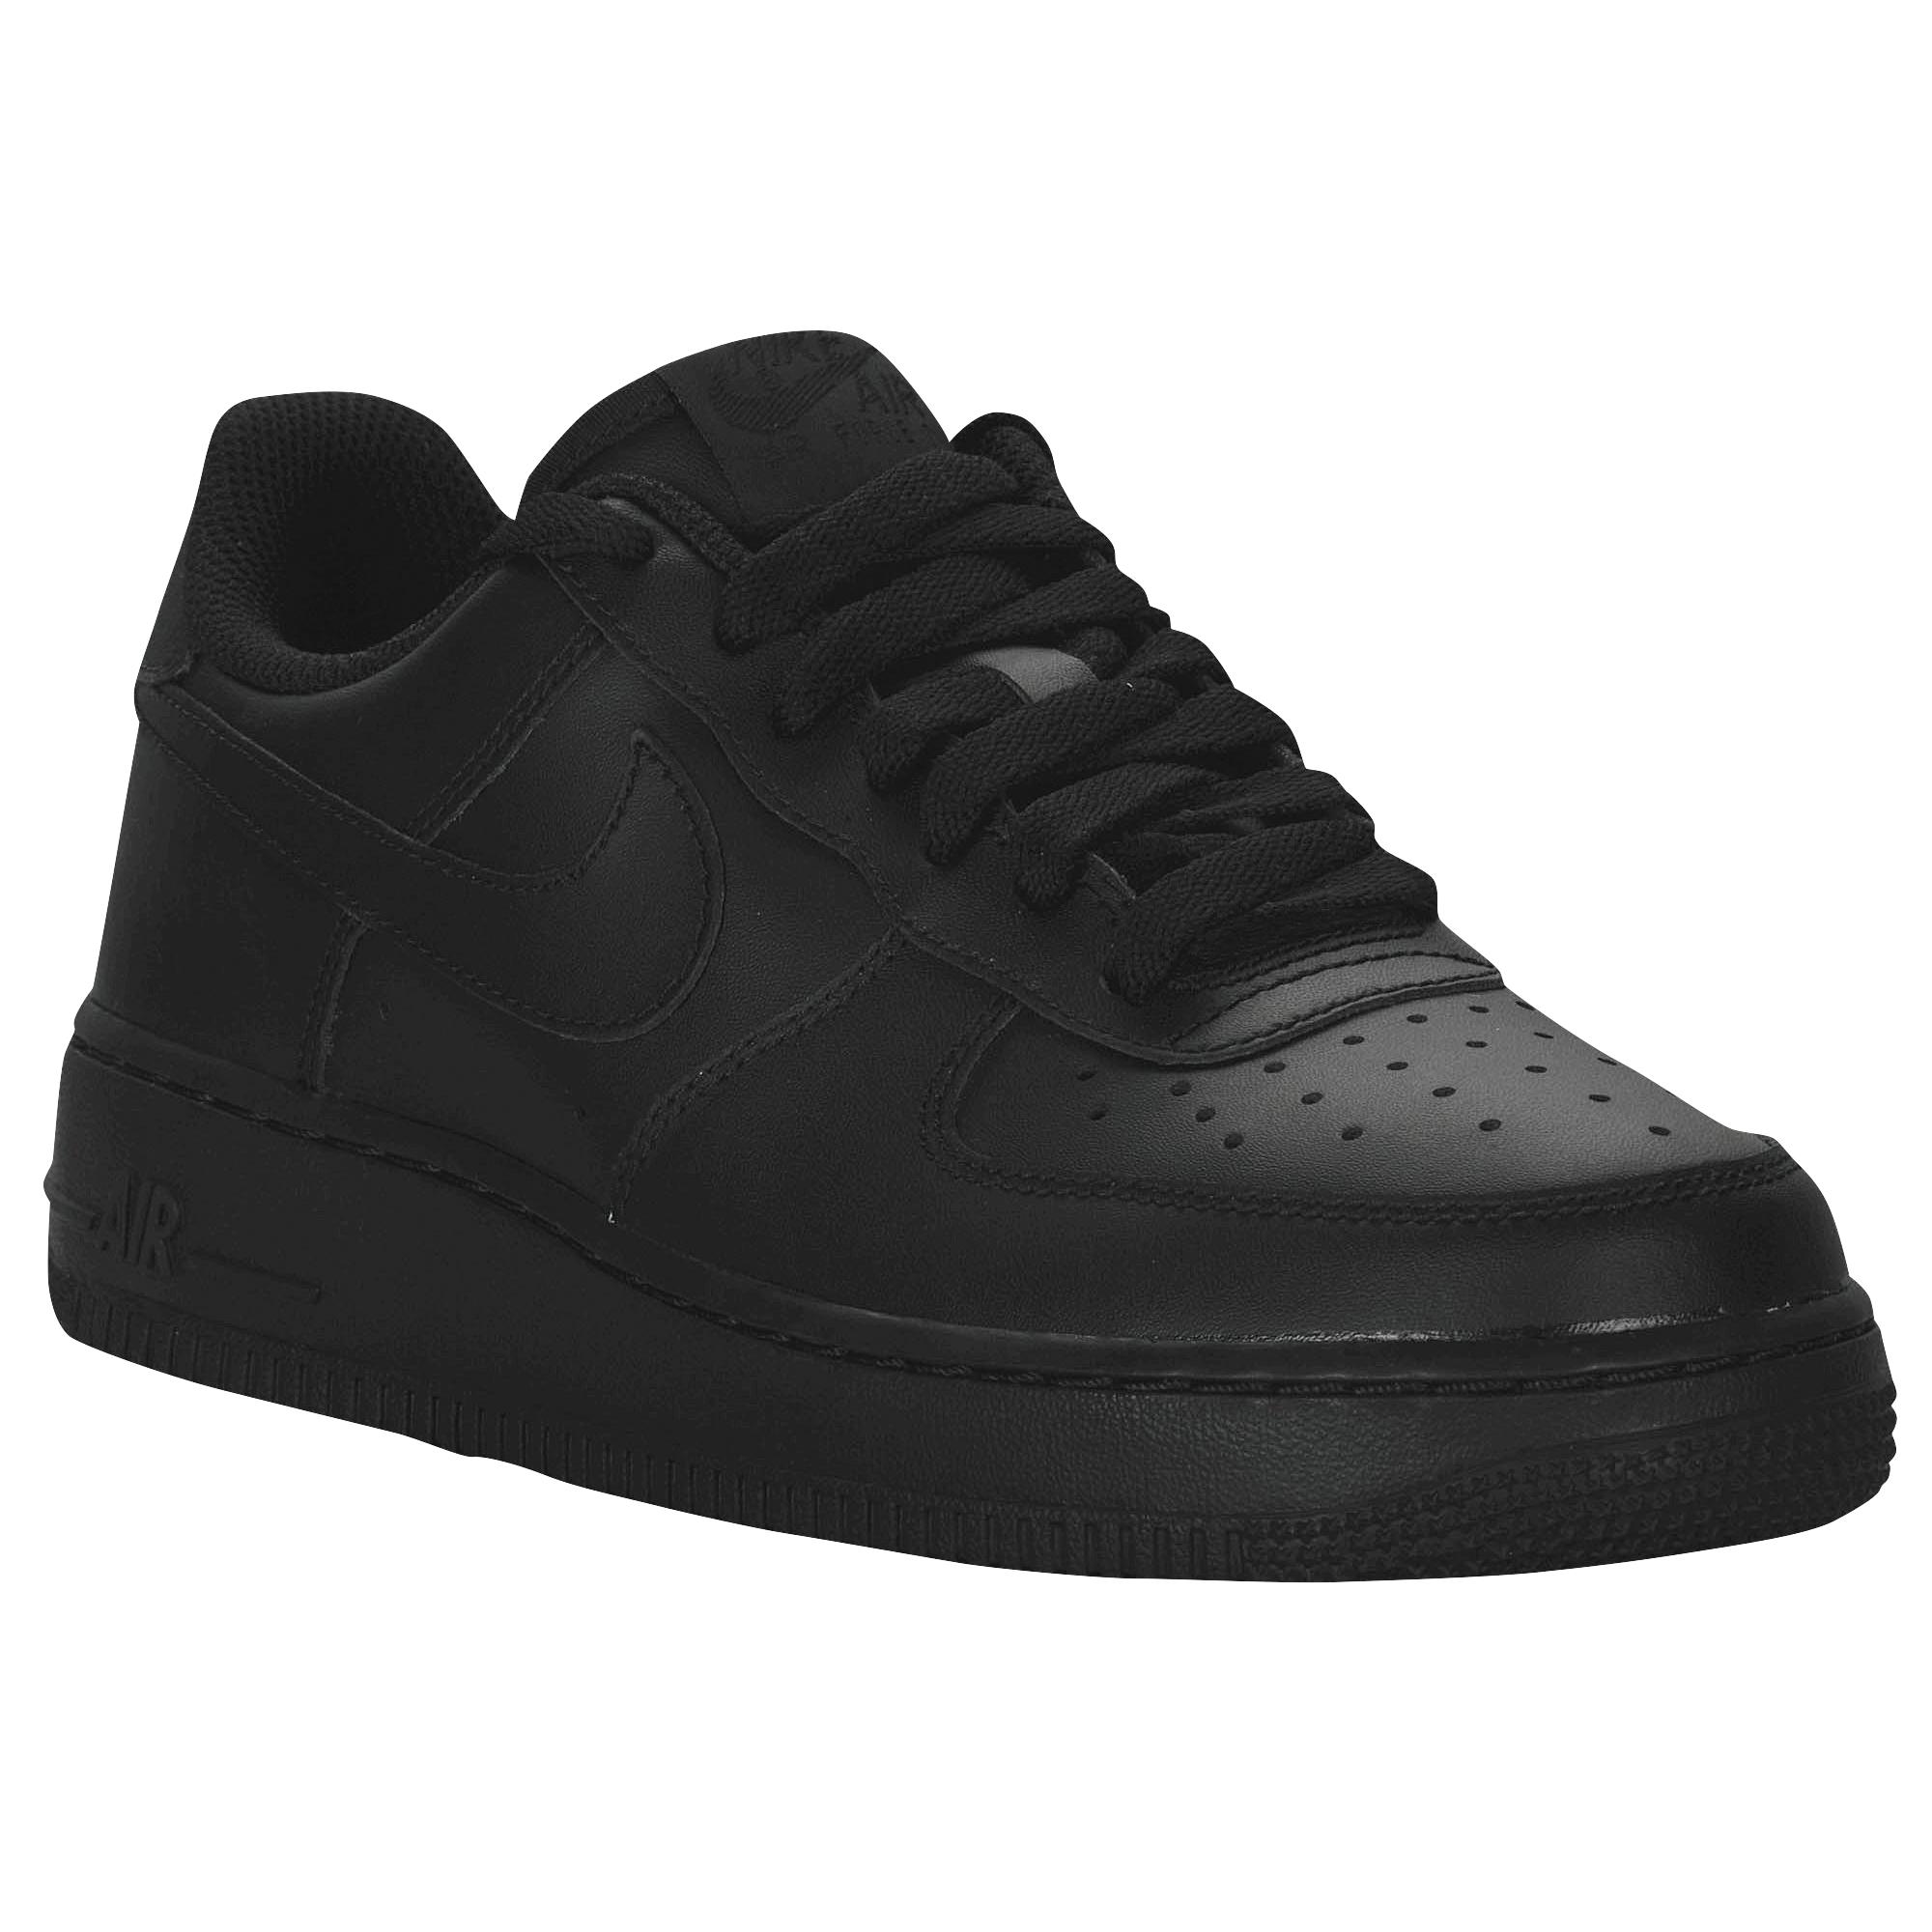 Nike Leather Air Force 1 Shoes in Black/Black (Black) for Men - Lyst